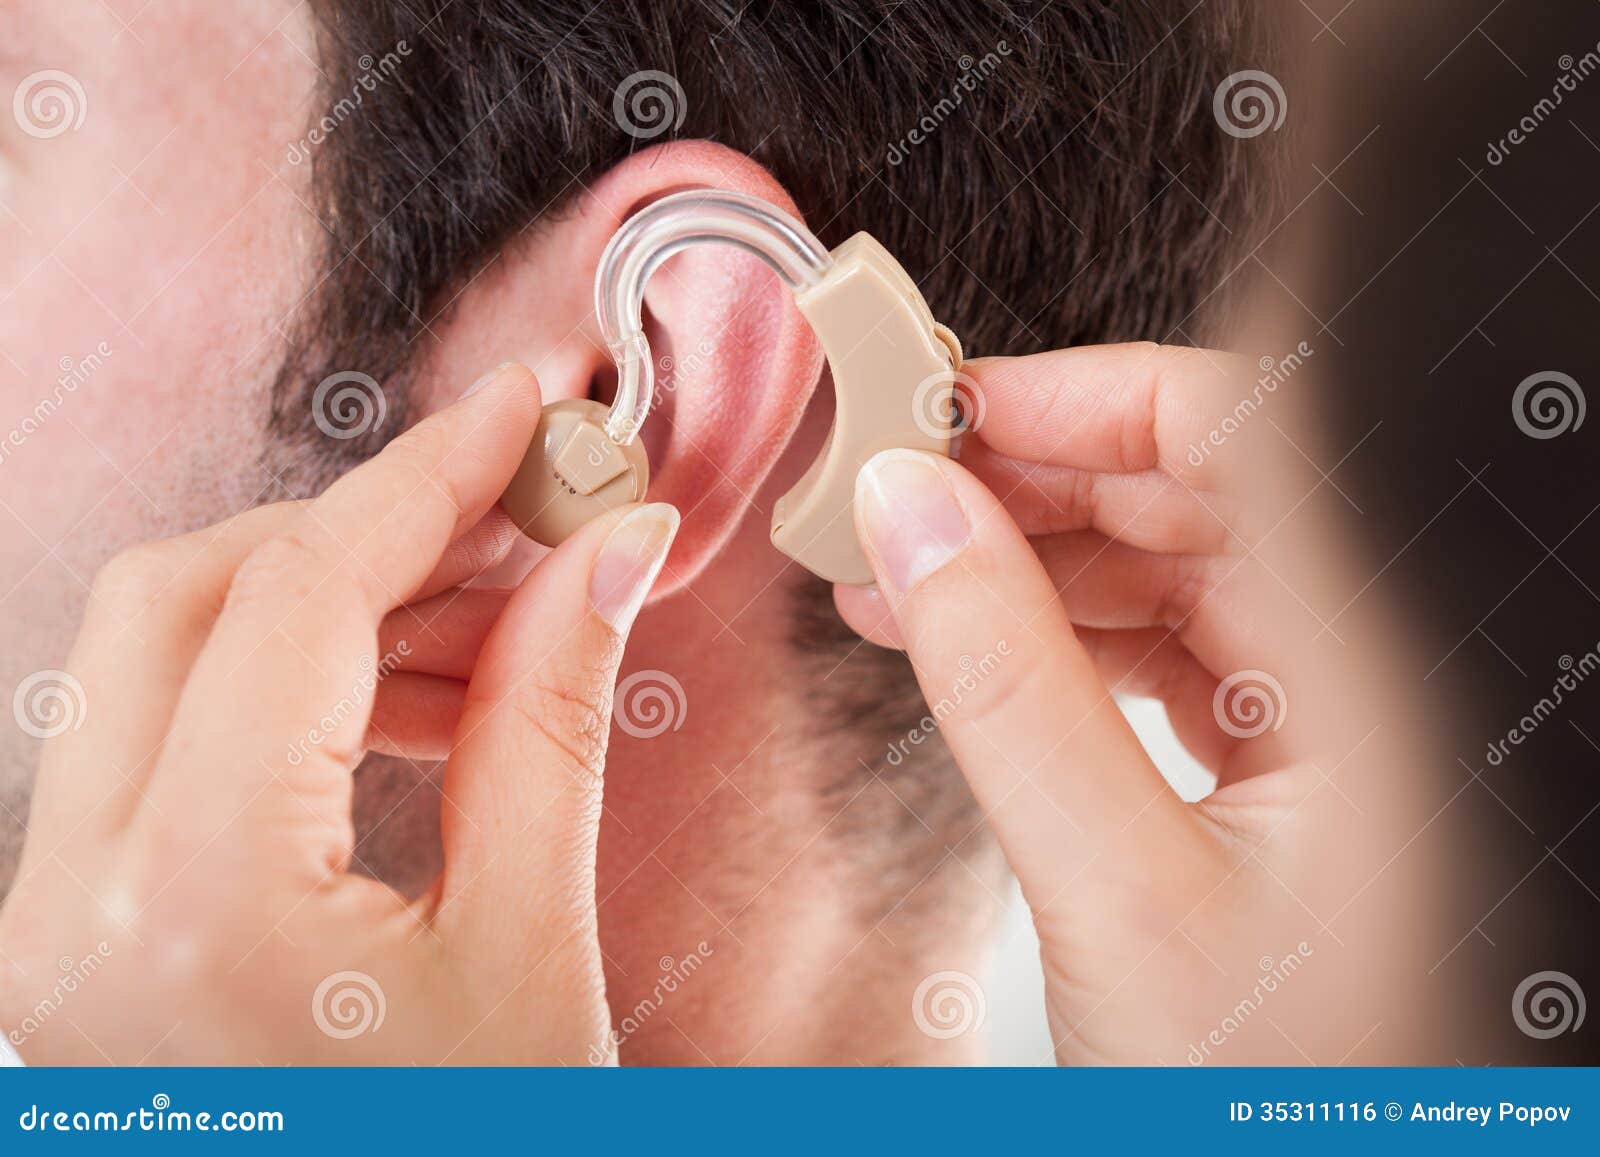 person adjusting hearing aid